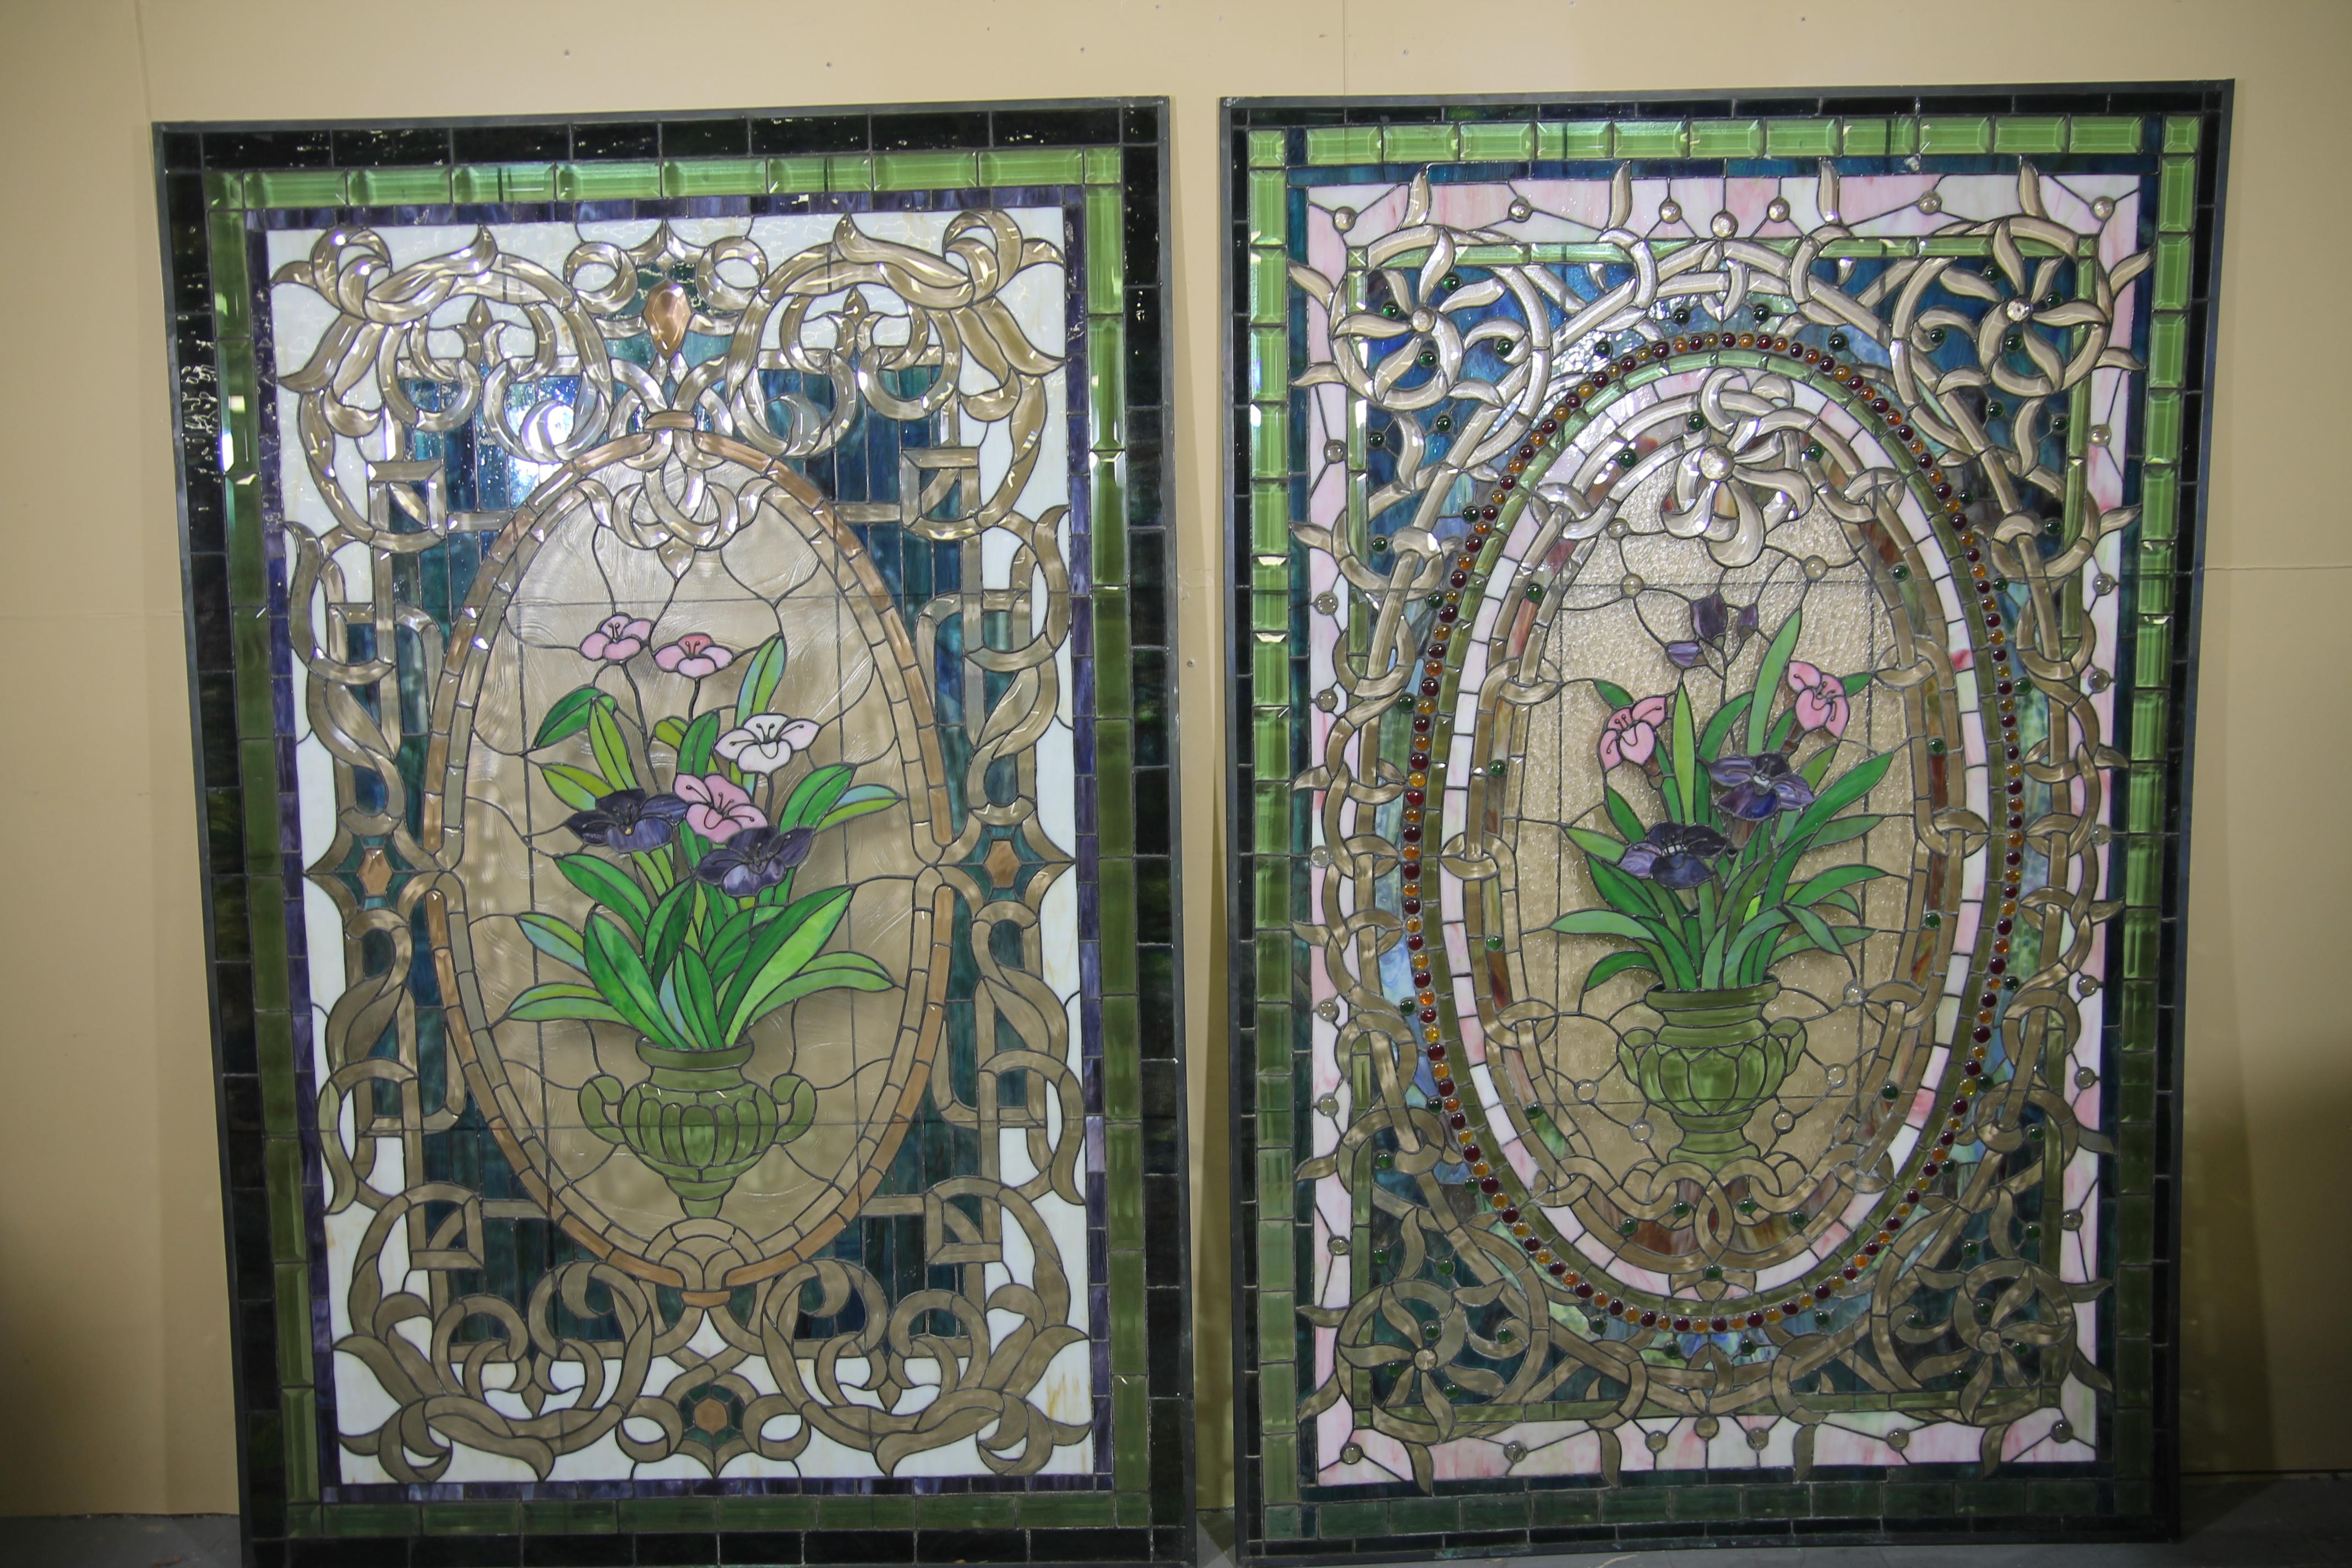 Pleased to off these great stain glass by NJ Artist Doug Hartman. These wonderful pieces were designed about 30 years ago but were never installed my his client. Dougs work is amazing and sadly Doug passed away in 2014.  These great panels are even